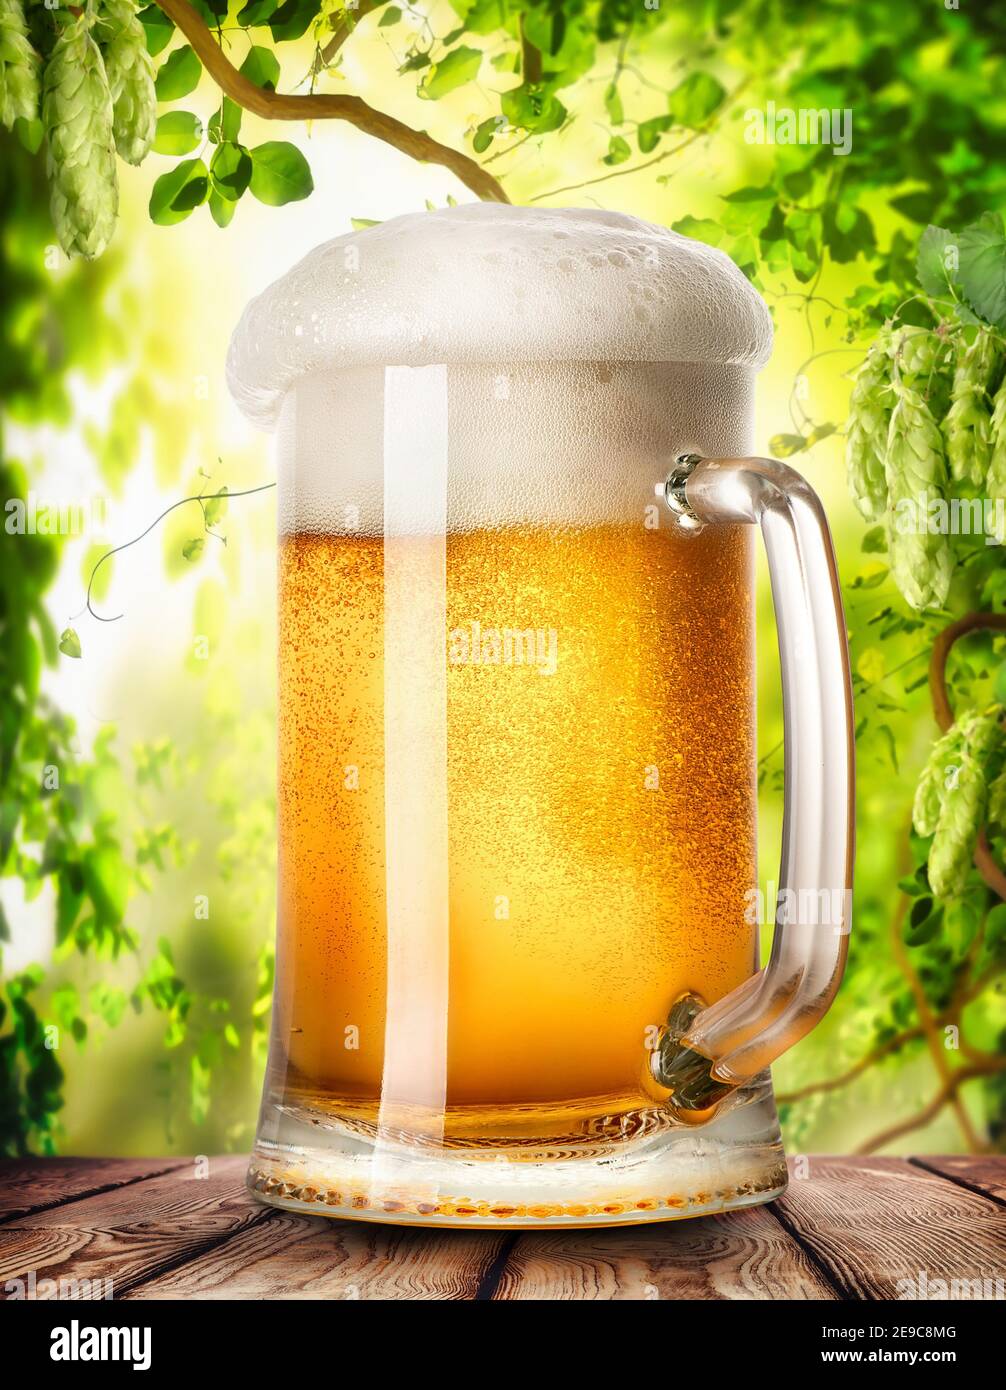 Mug of light beer against the backdrop of a hop garden. Stock Photo